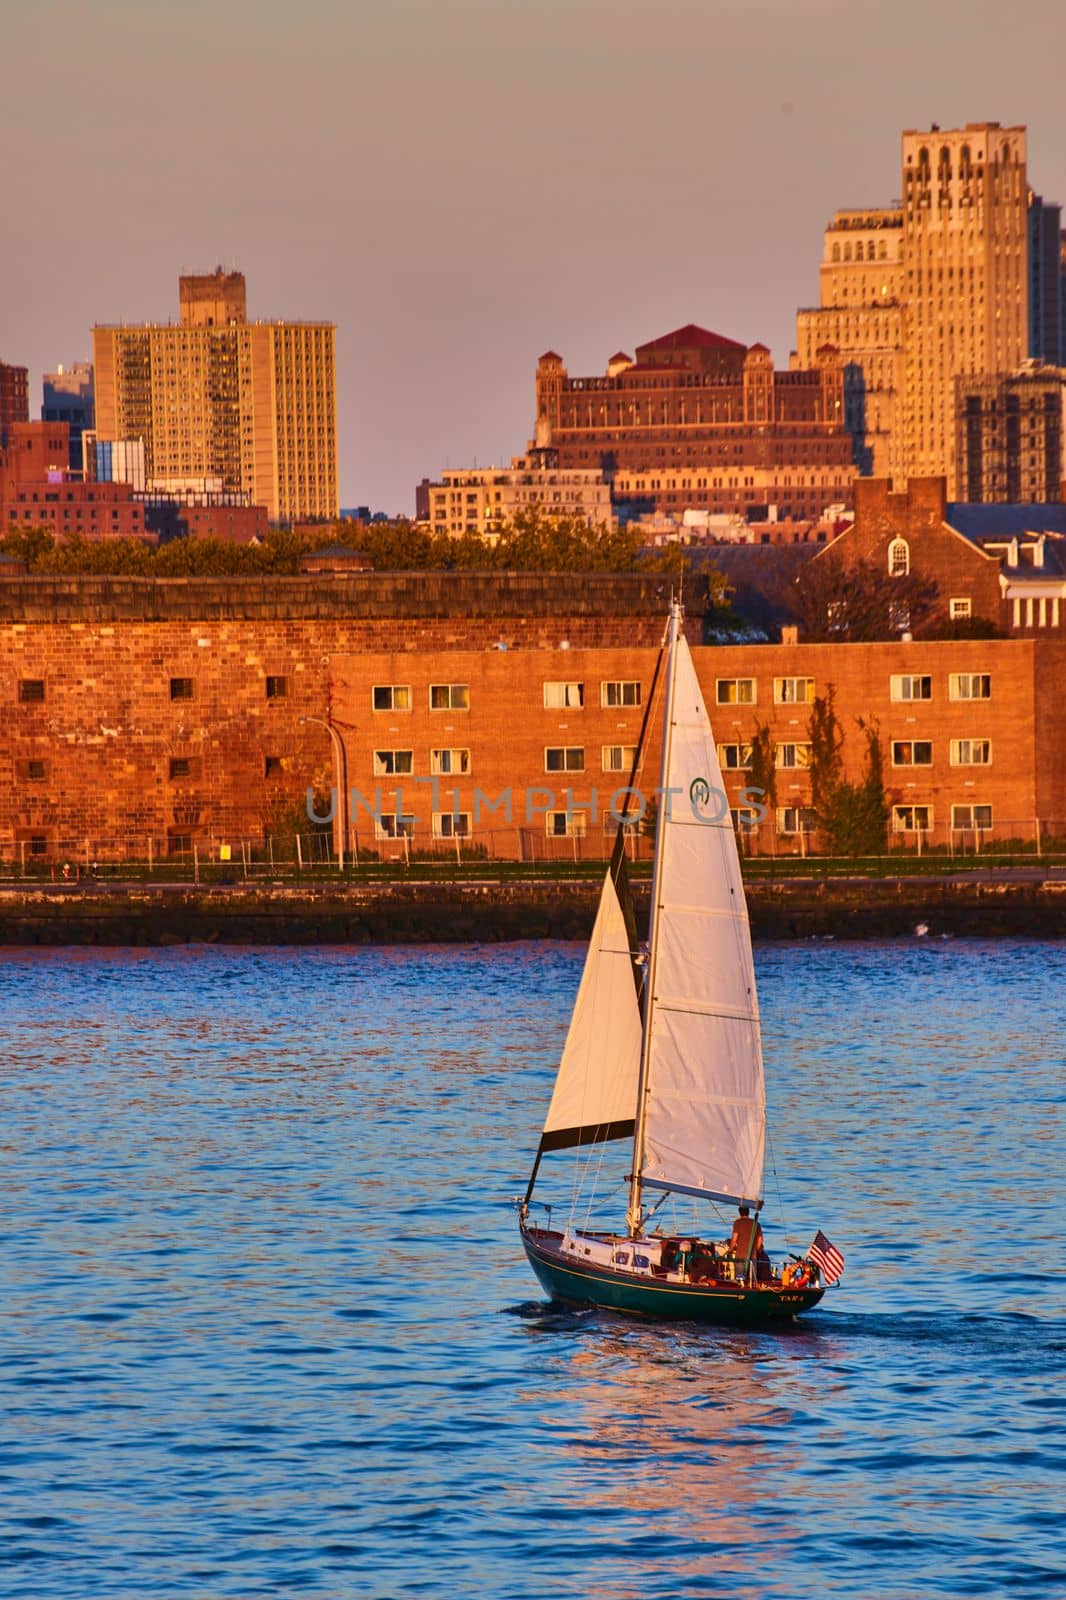 Image of Dusk golden hour focus on sailboat in waters by Governors Island in New York City